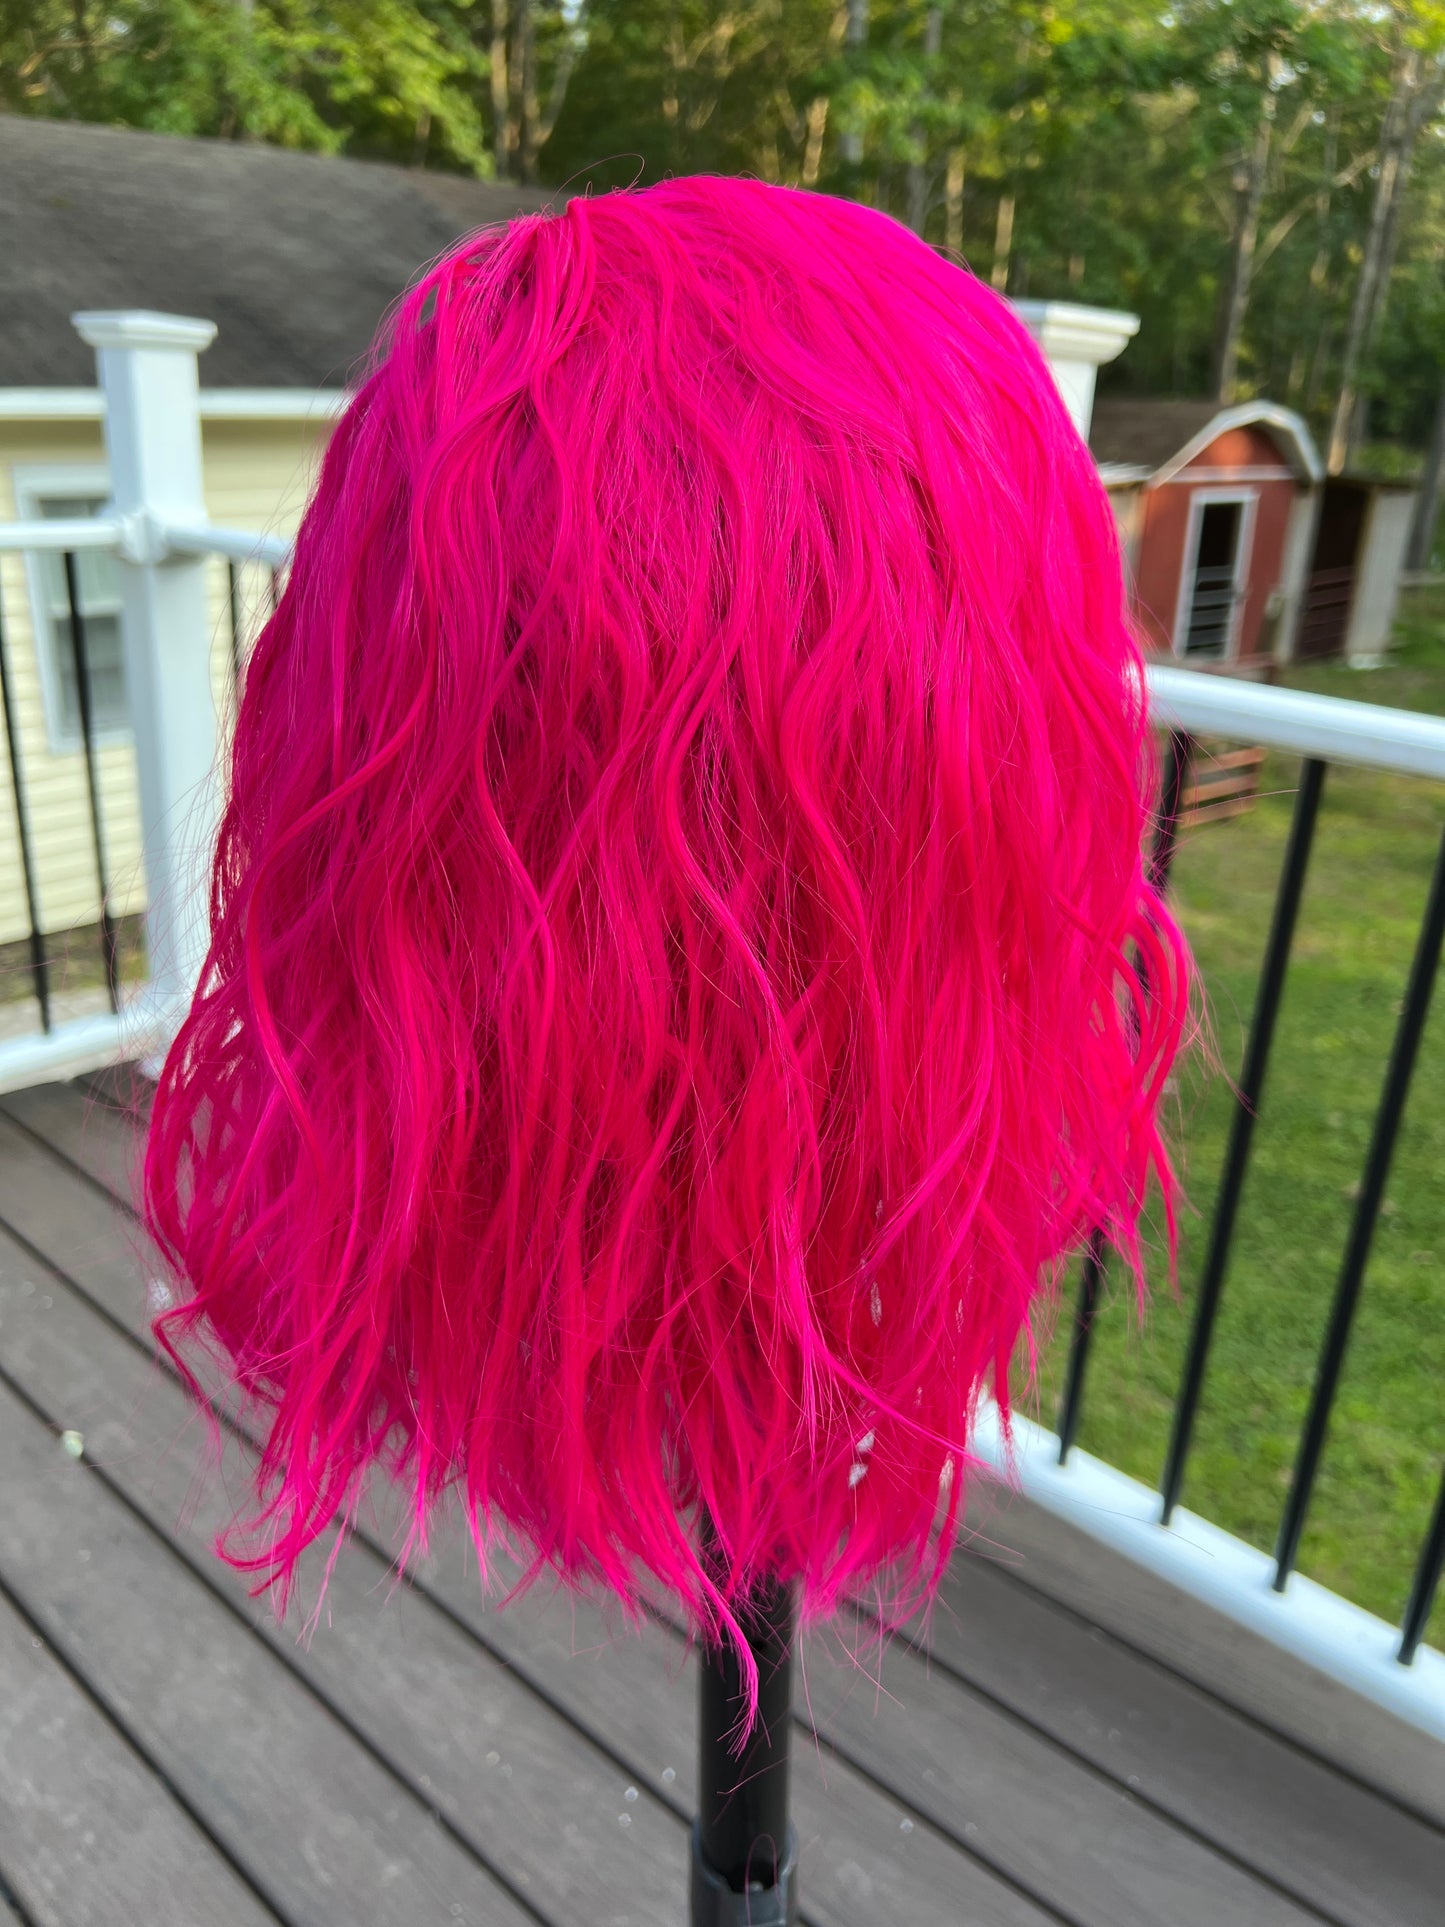 Synthetic wig transformation! I used Rit Dye in Super Pink. I never want to  take this wig off! : r/Wigs